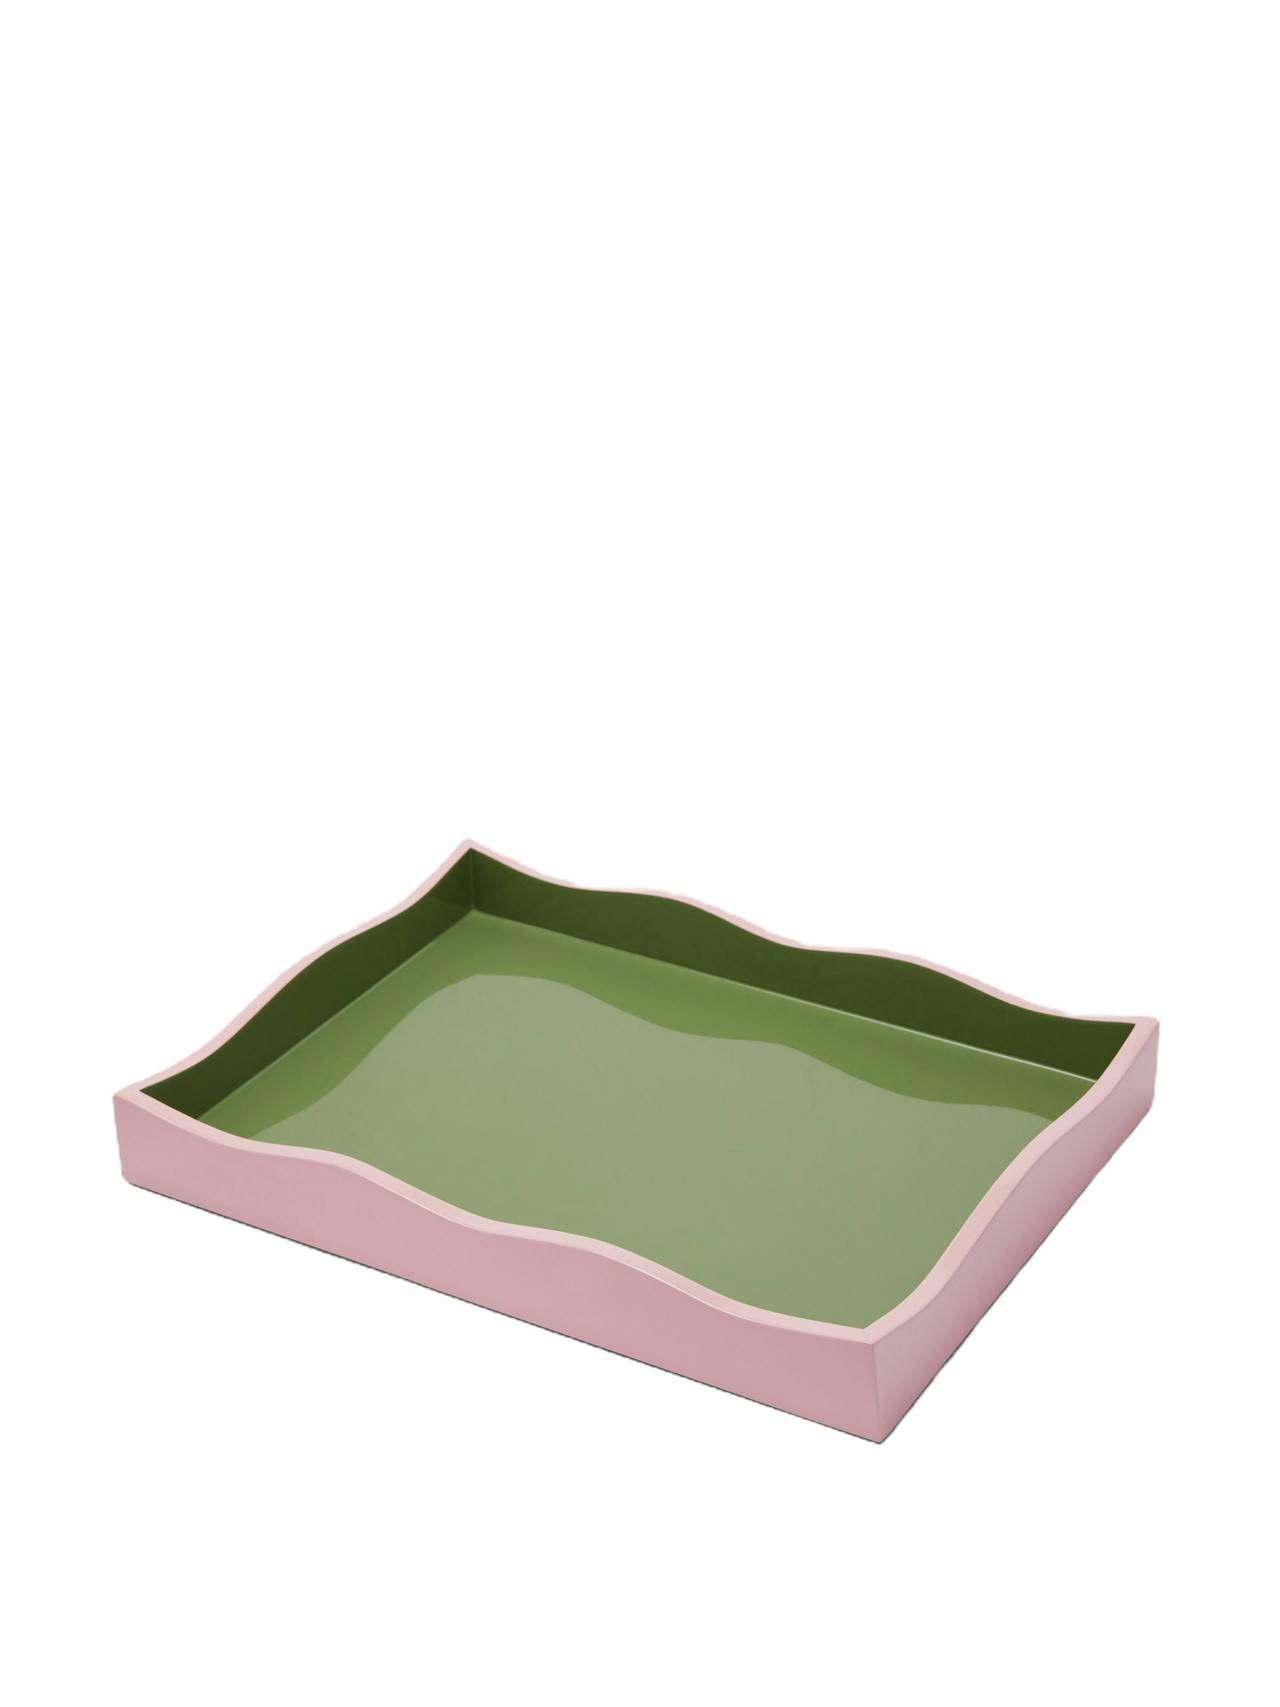 Wiggle tray in pink and green